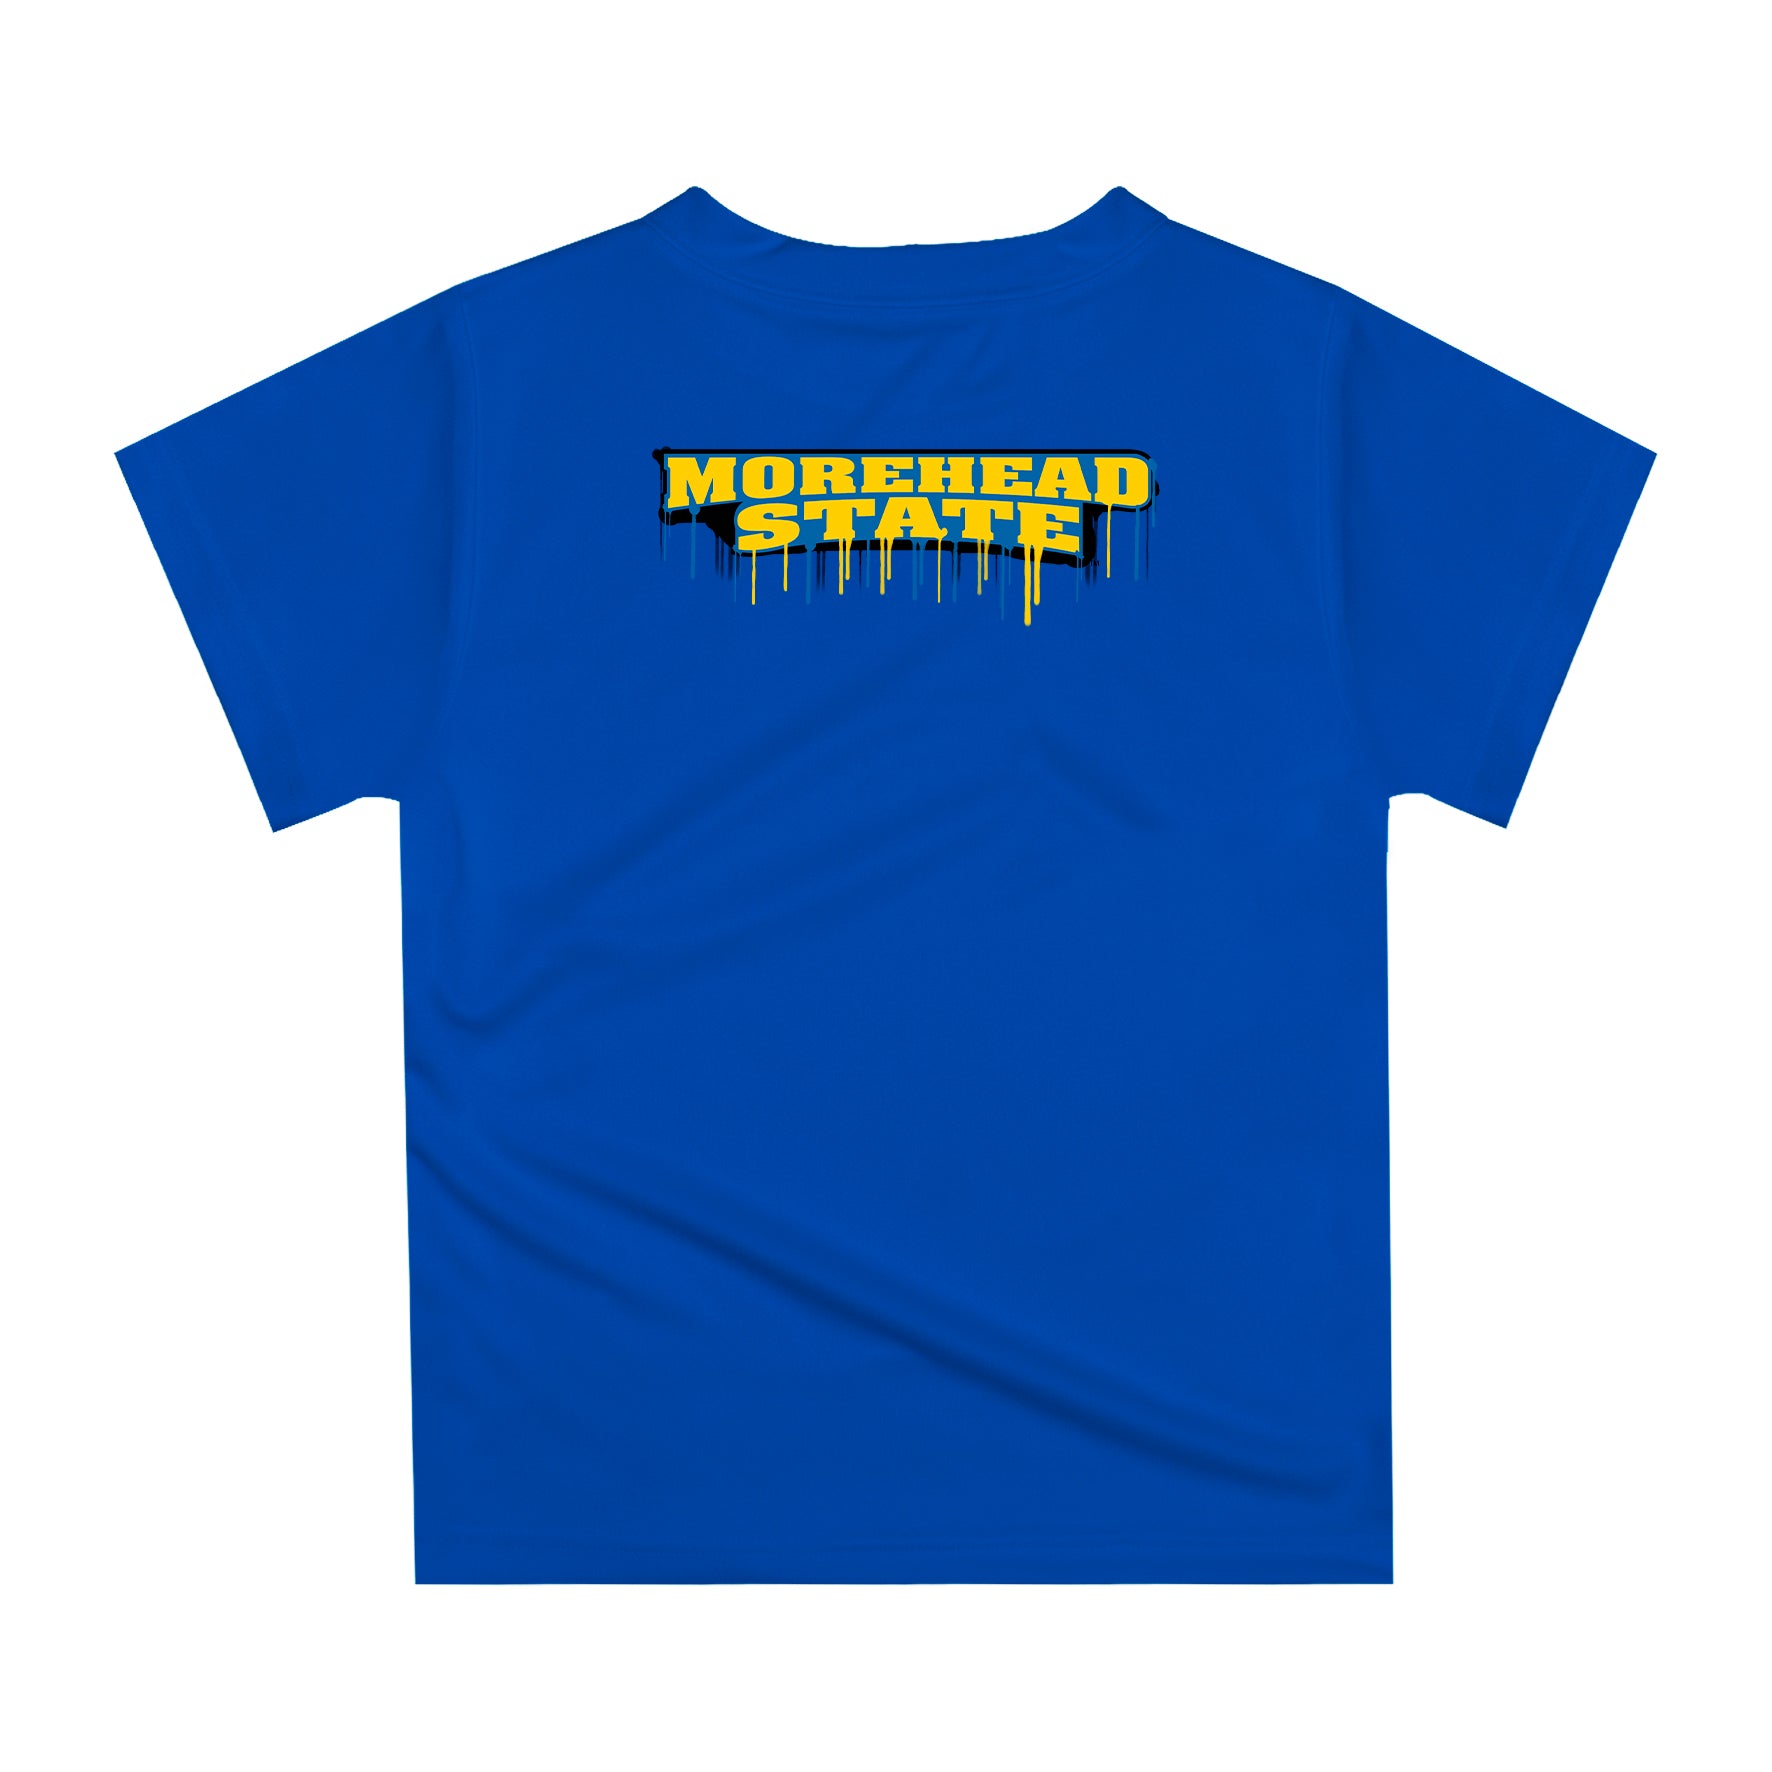 MSU Morehead State University Eagles Apparel – Official Team Gear